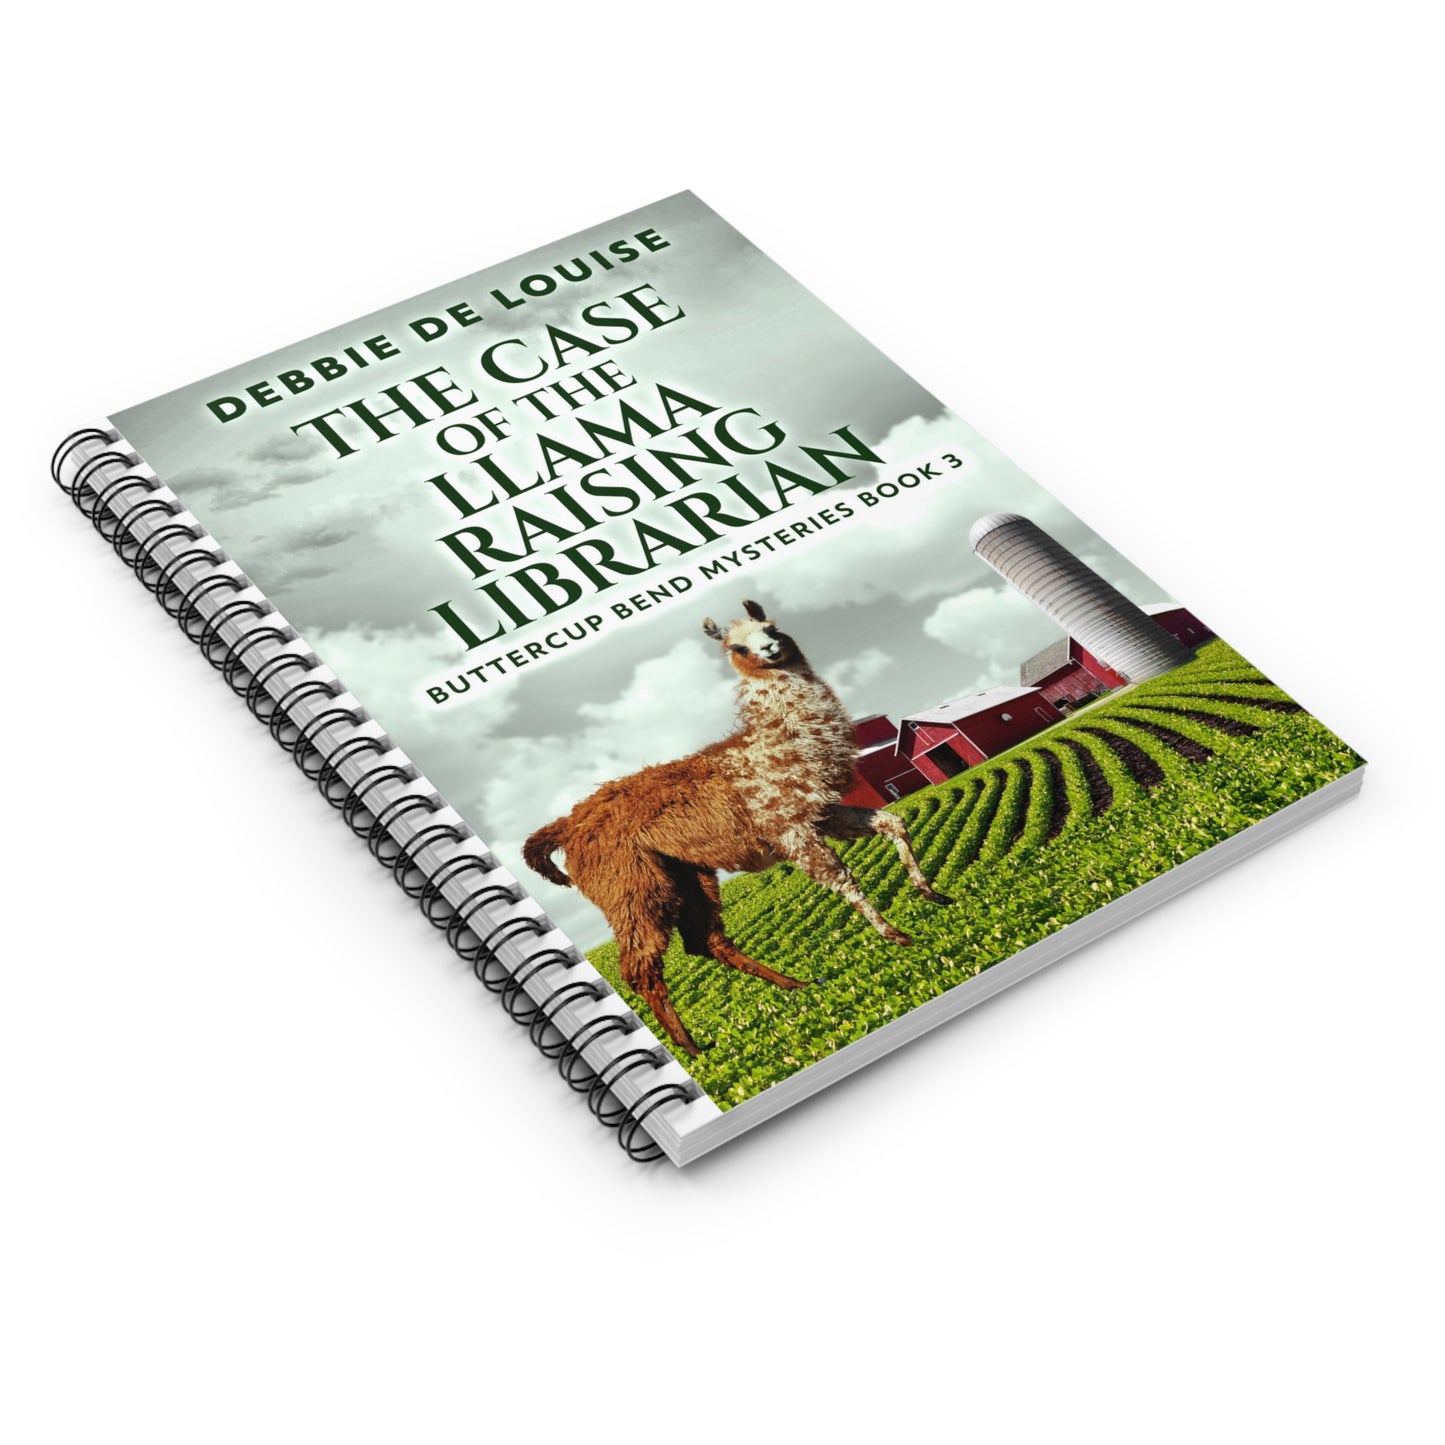 The Case of the Llama Raising Librarian - Spiral Notebook